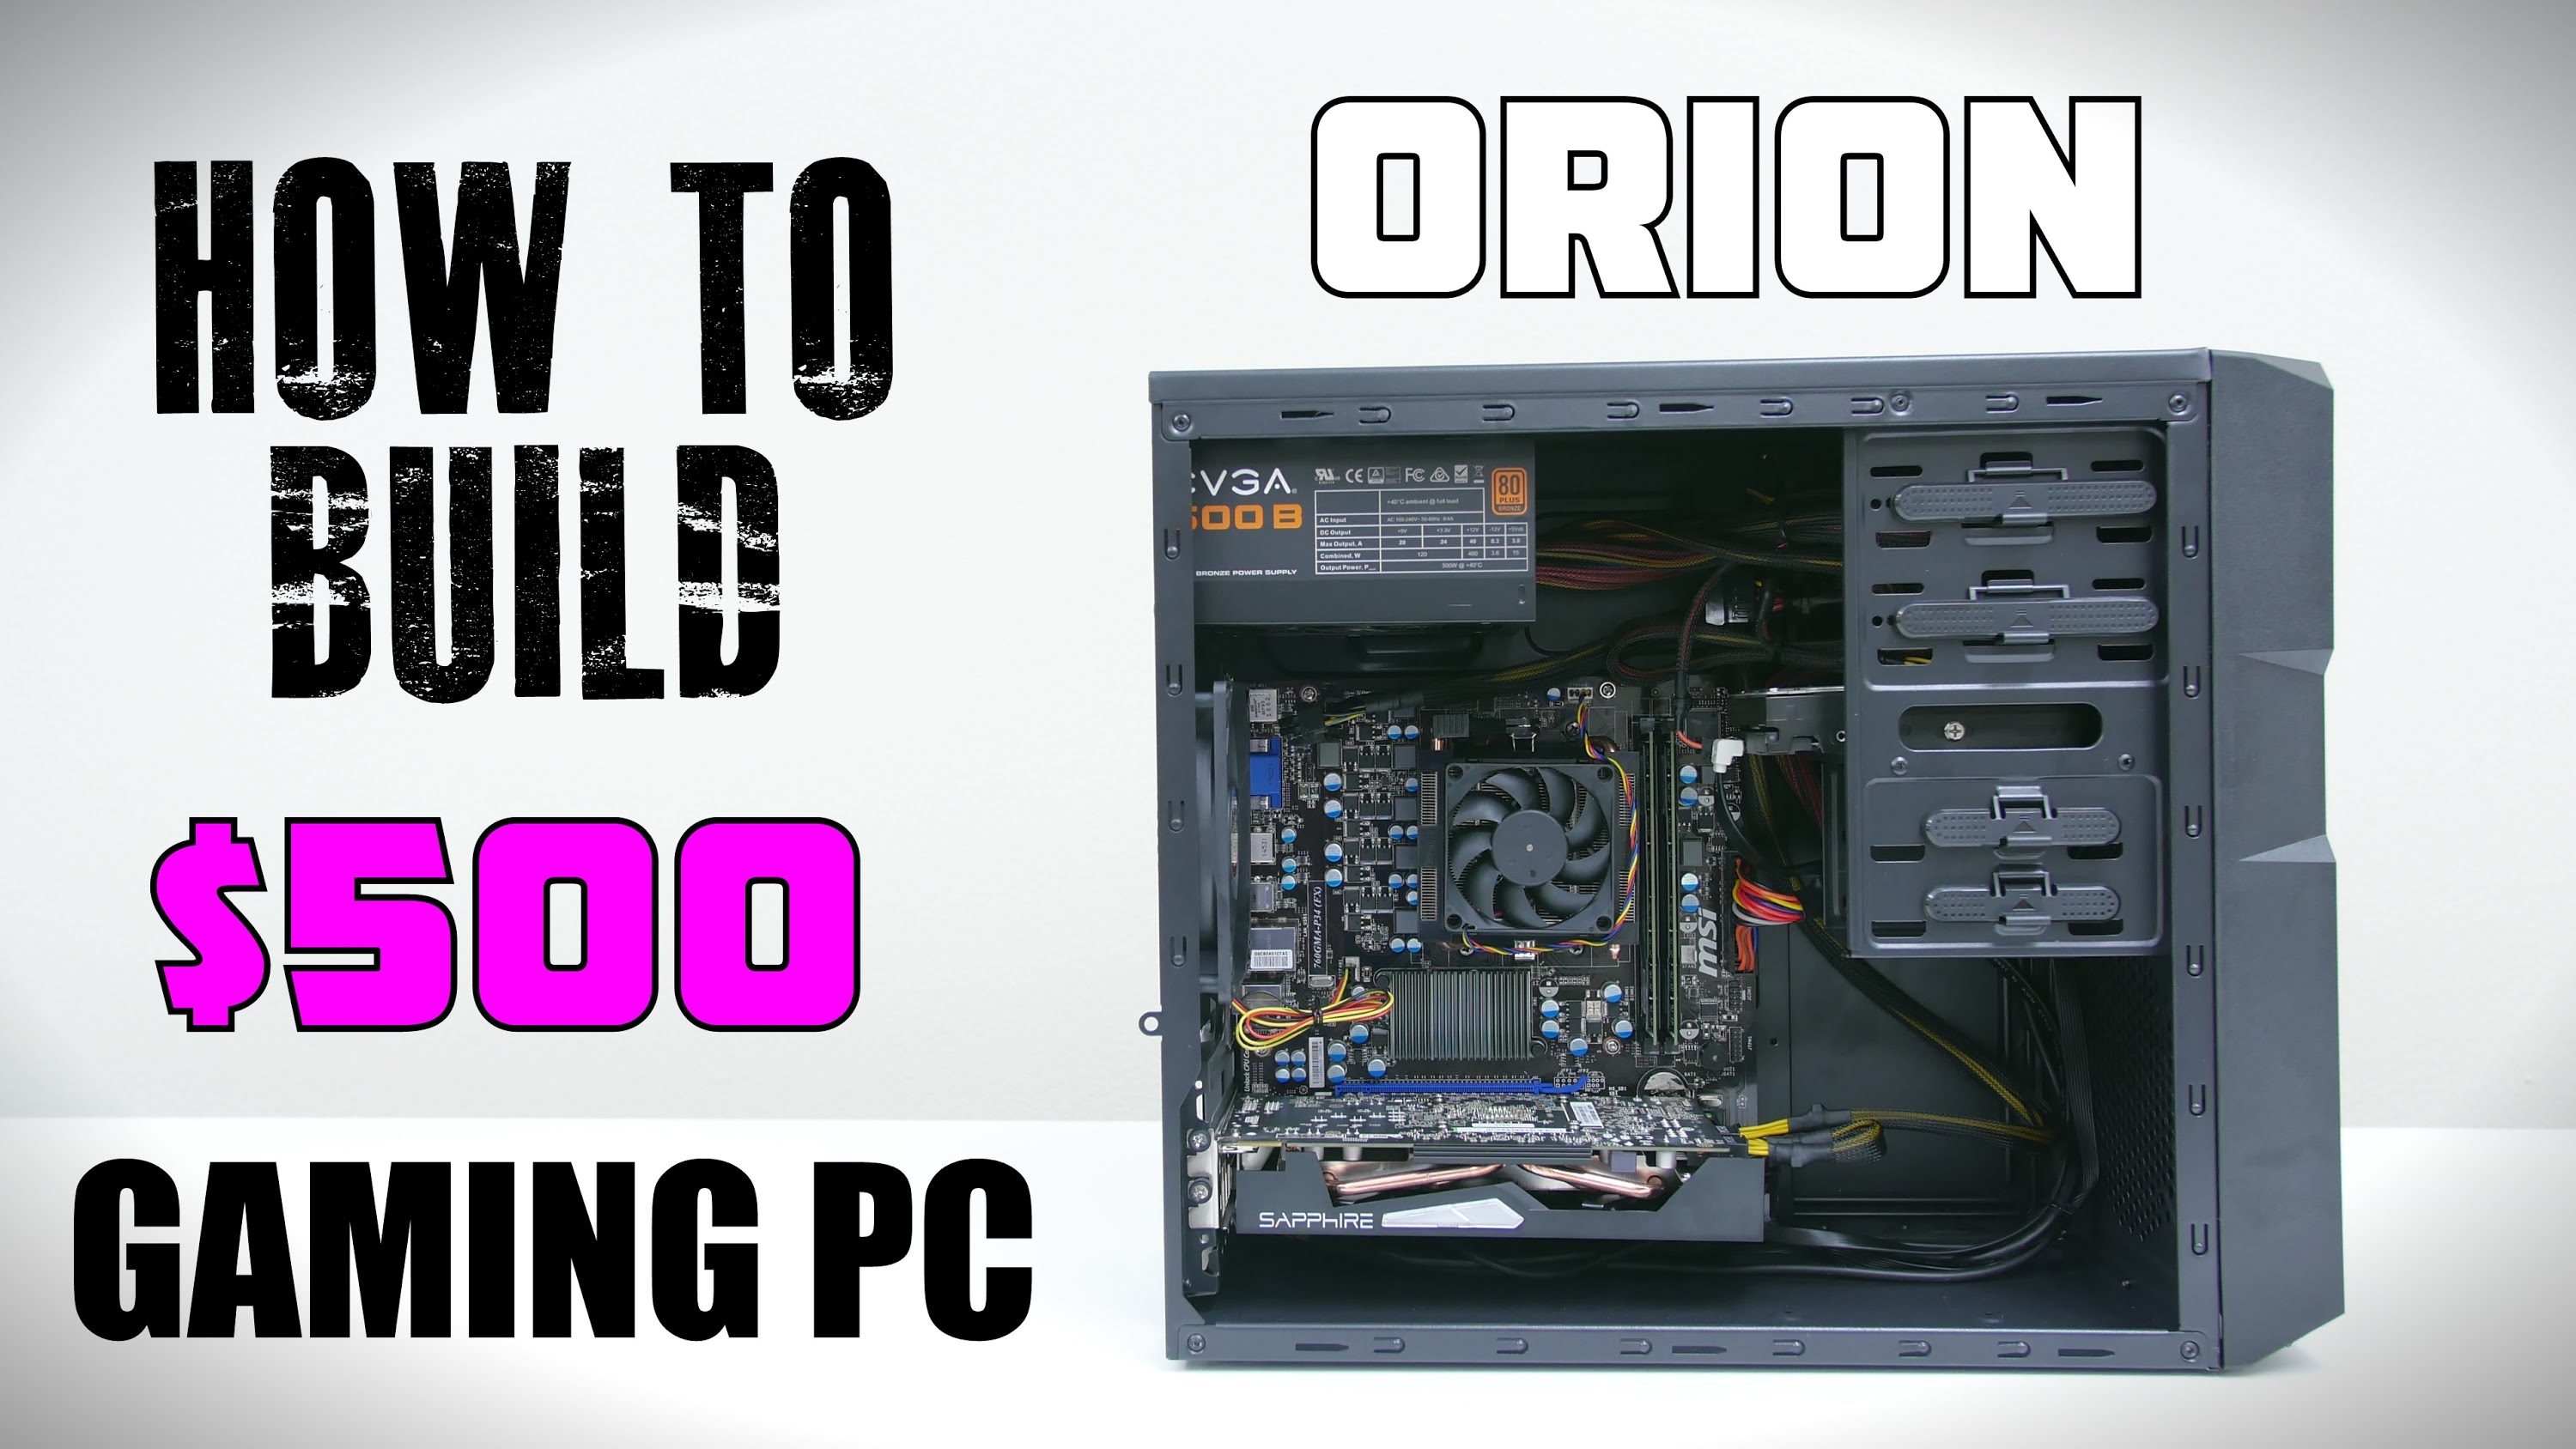 Теги пк. Gaming PC build. PC Gamer for 500$. Dedicated Graphics Card. How to build a Gaming PC Series перевод.